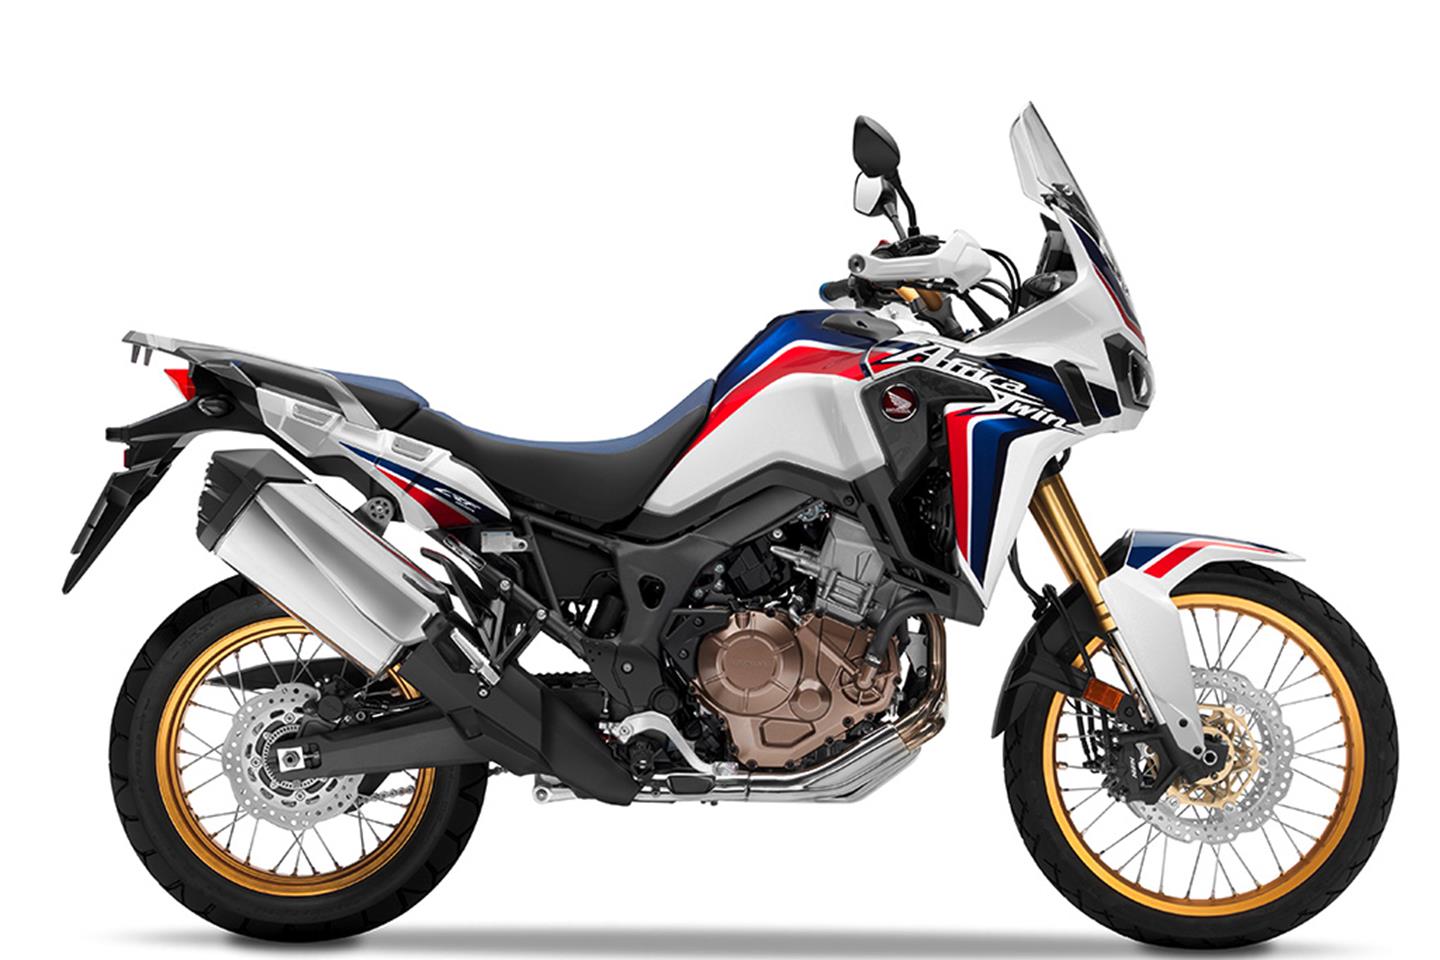 HONDA CRF1000L AFRICA TWIN (2016-2019) Motorcycle Review